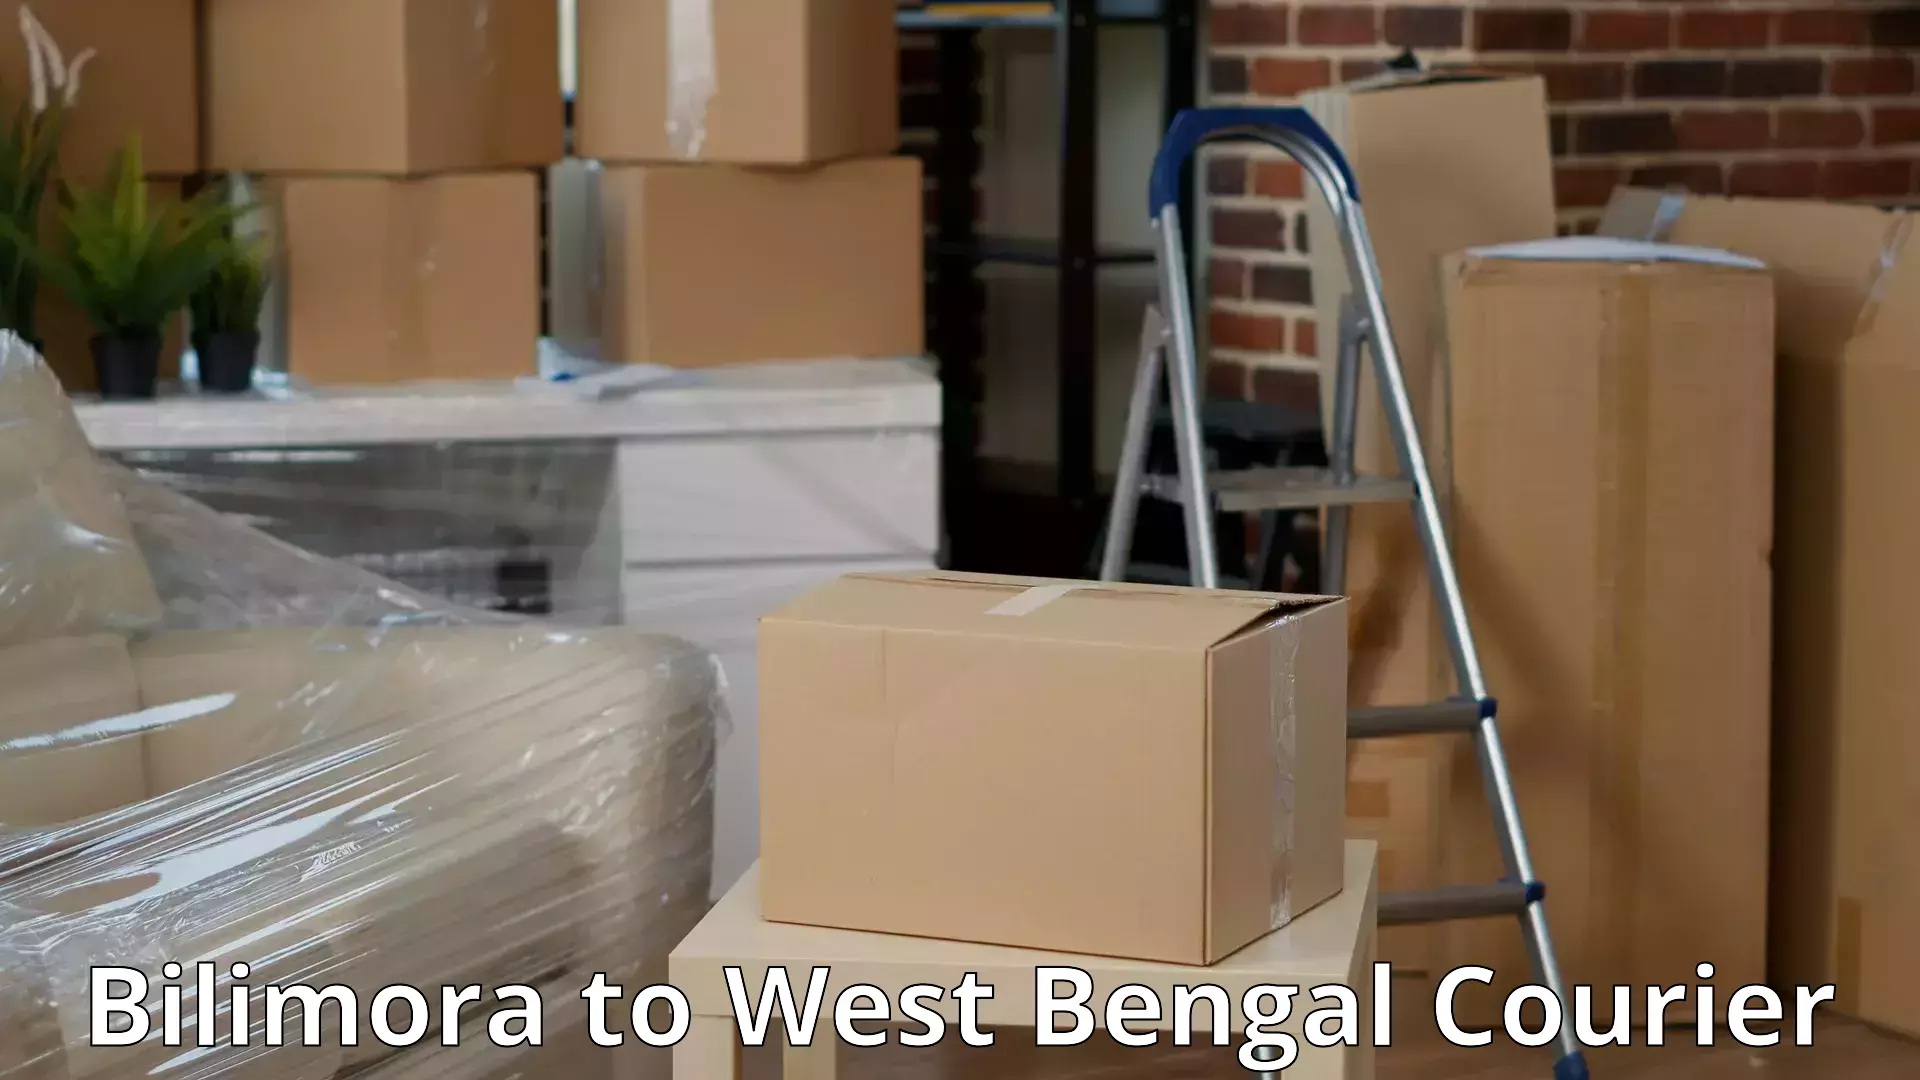 Full-service household moving in Bilimora to West Bengal